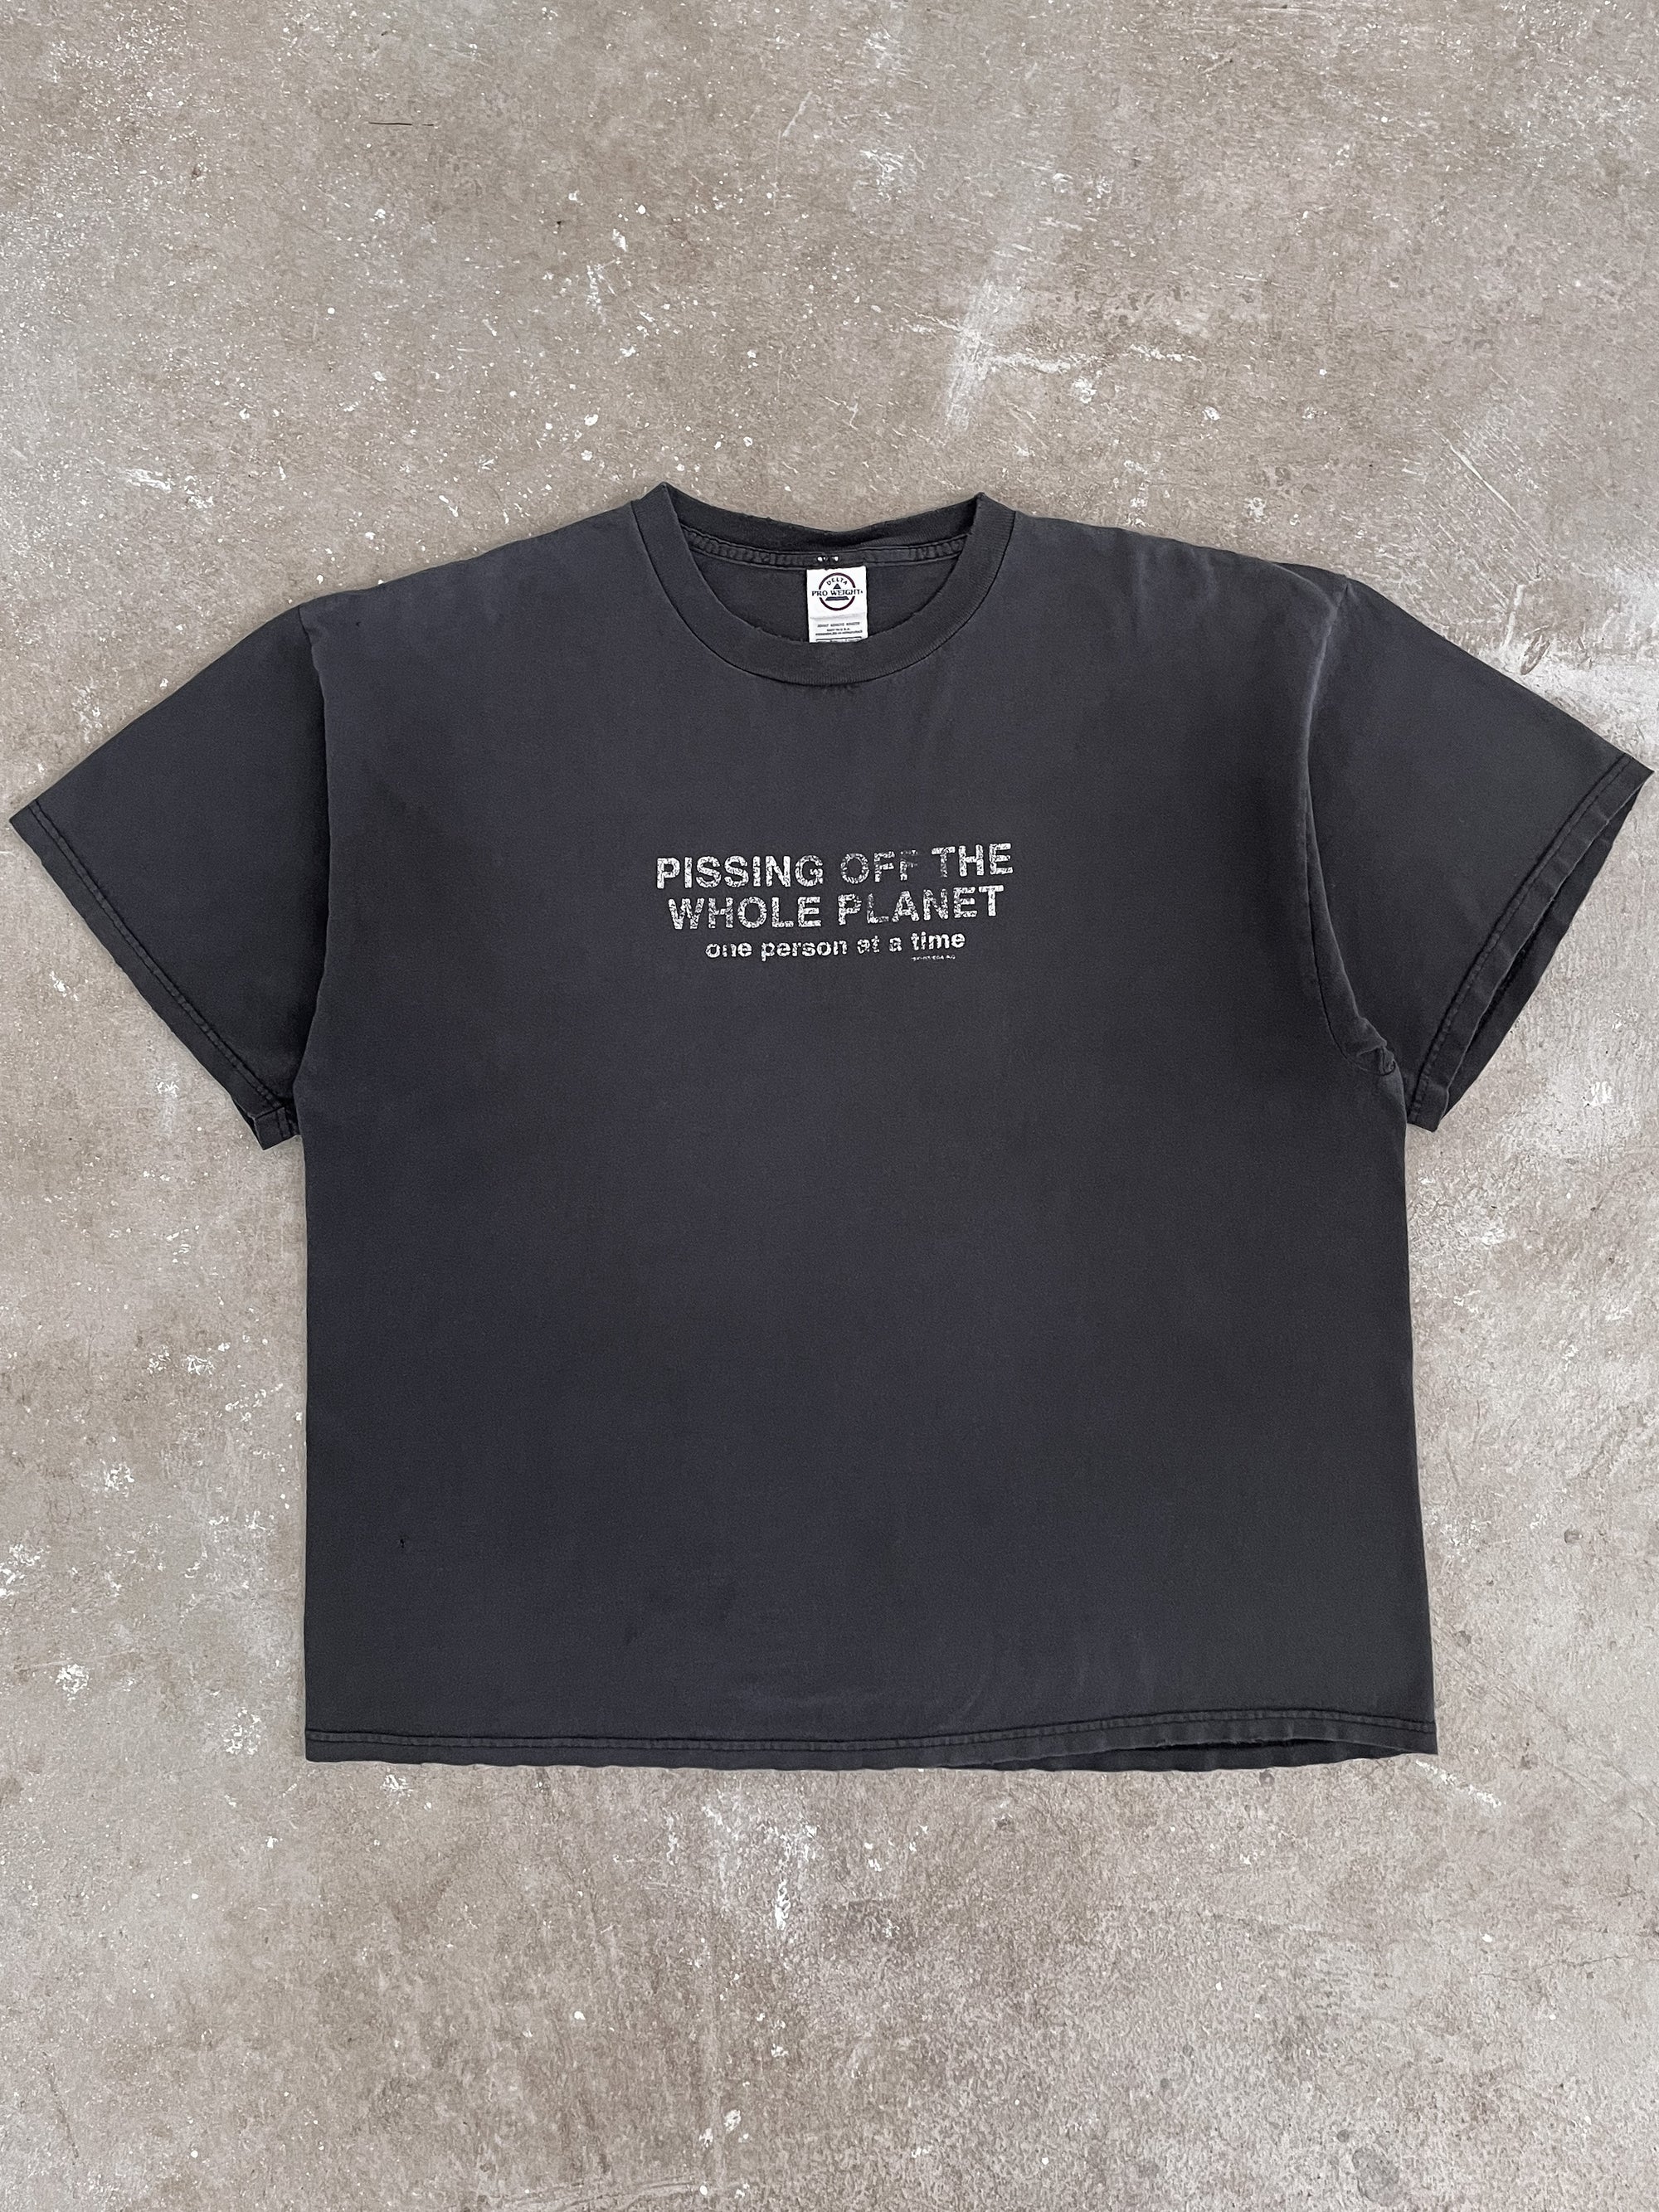 2000s “Pissing Off The Whole Planet…” Faded Tee (XL)